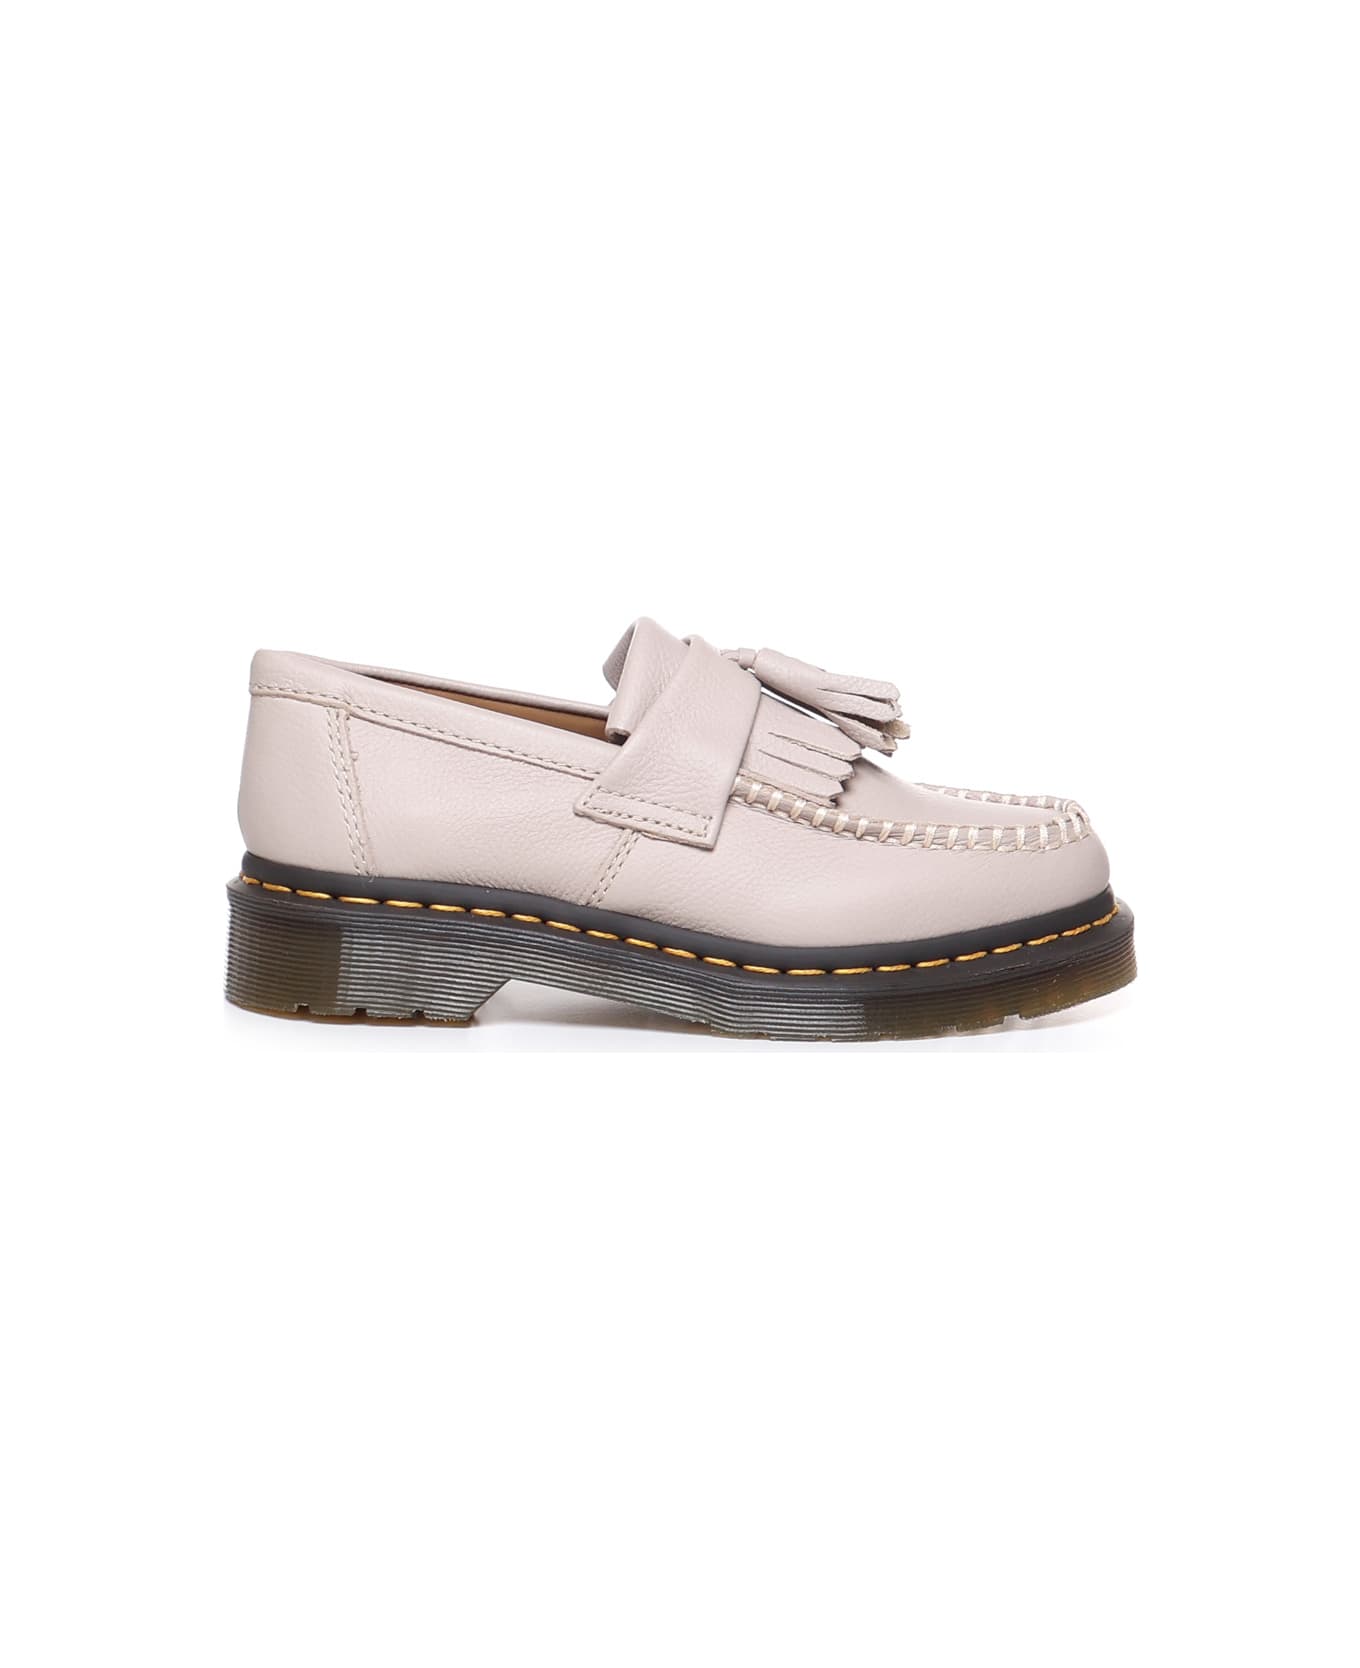 Dr. Martens Adrian Moccasins With Tassels In Virginia Leather - White